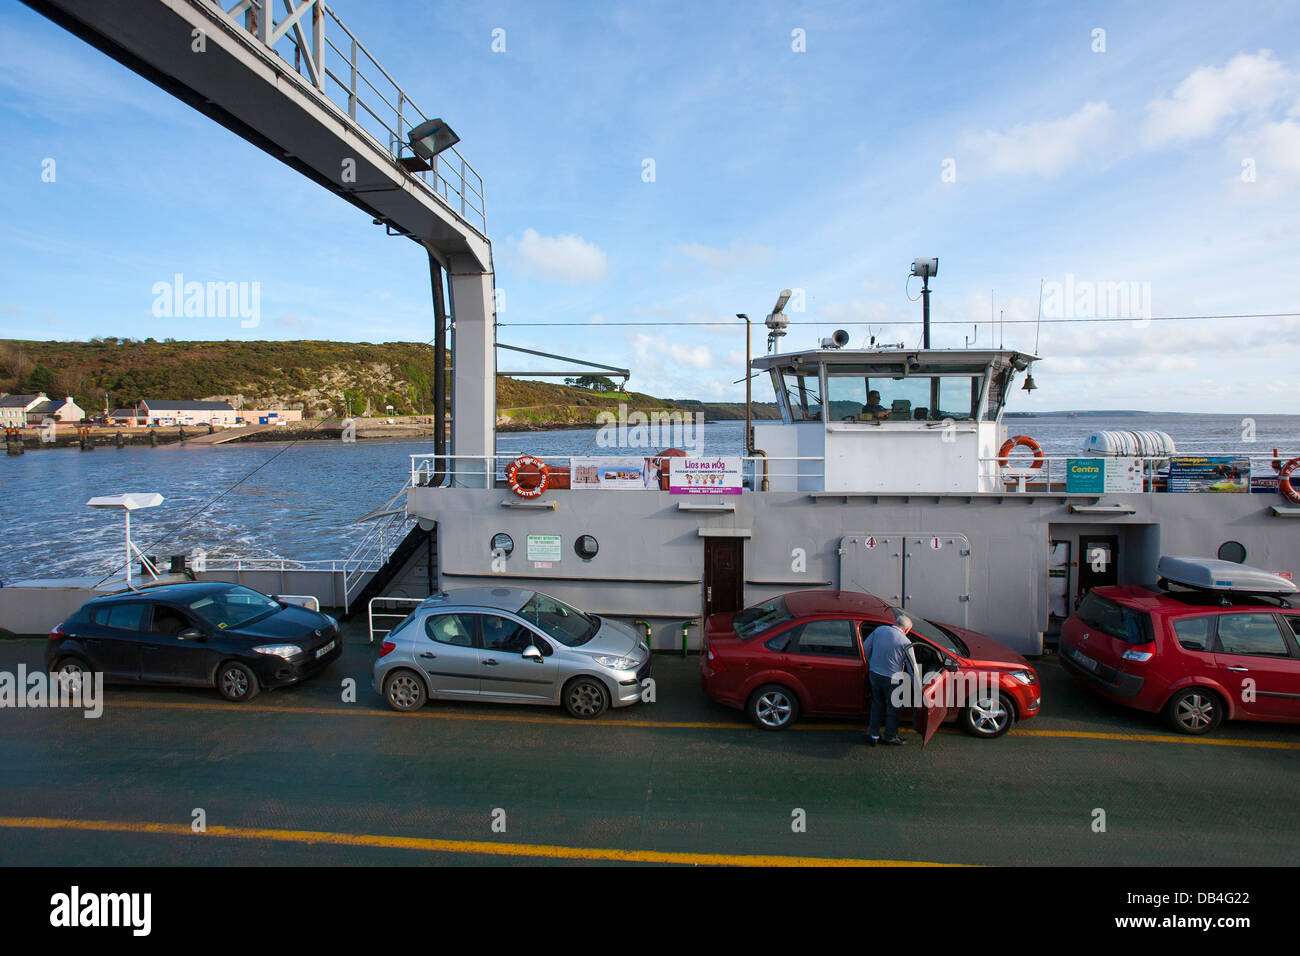 The car ferry running from Magilligan to Greencastle in County Sligo, republic of Ireland, carrying cars and vehicles. Stock Photo